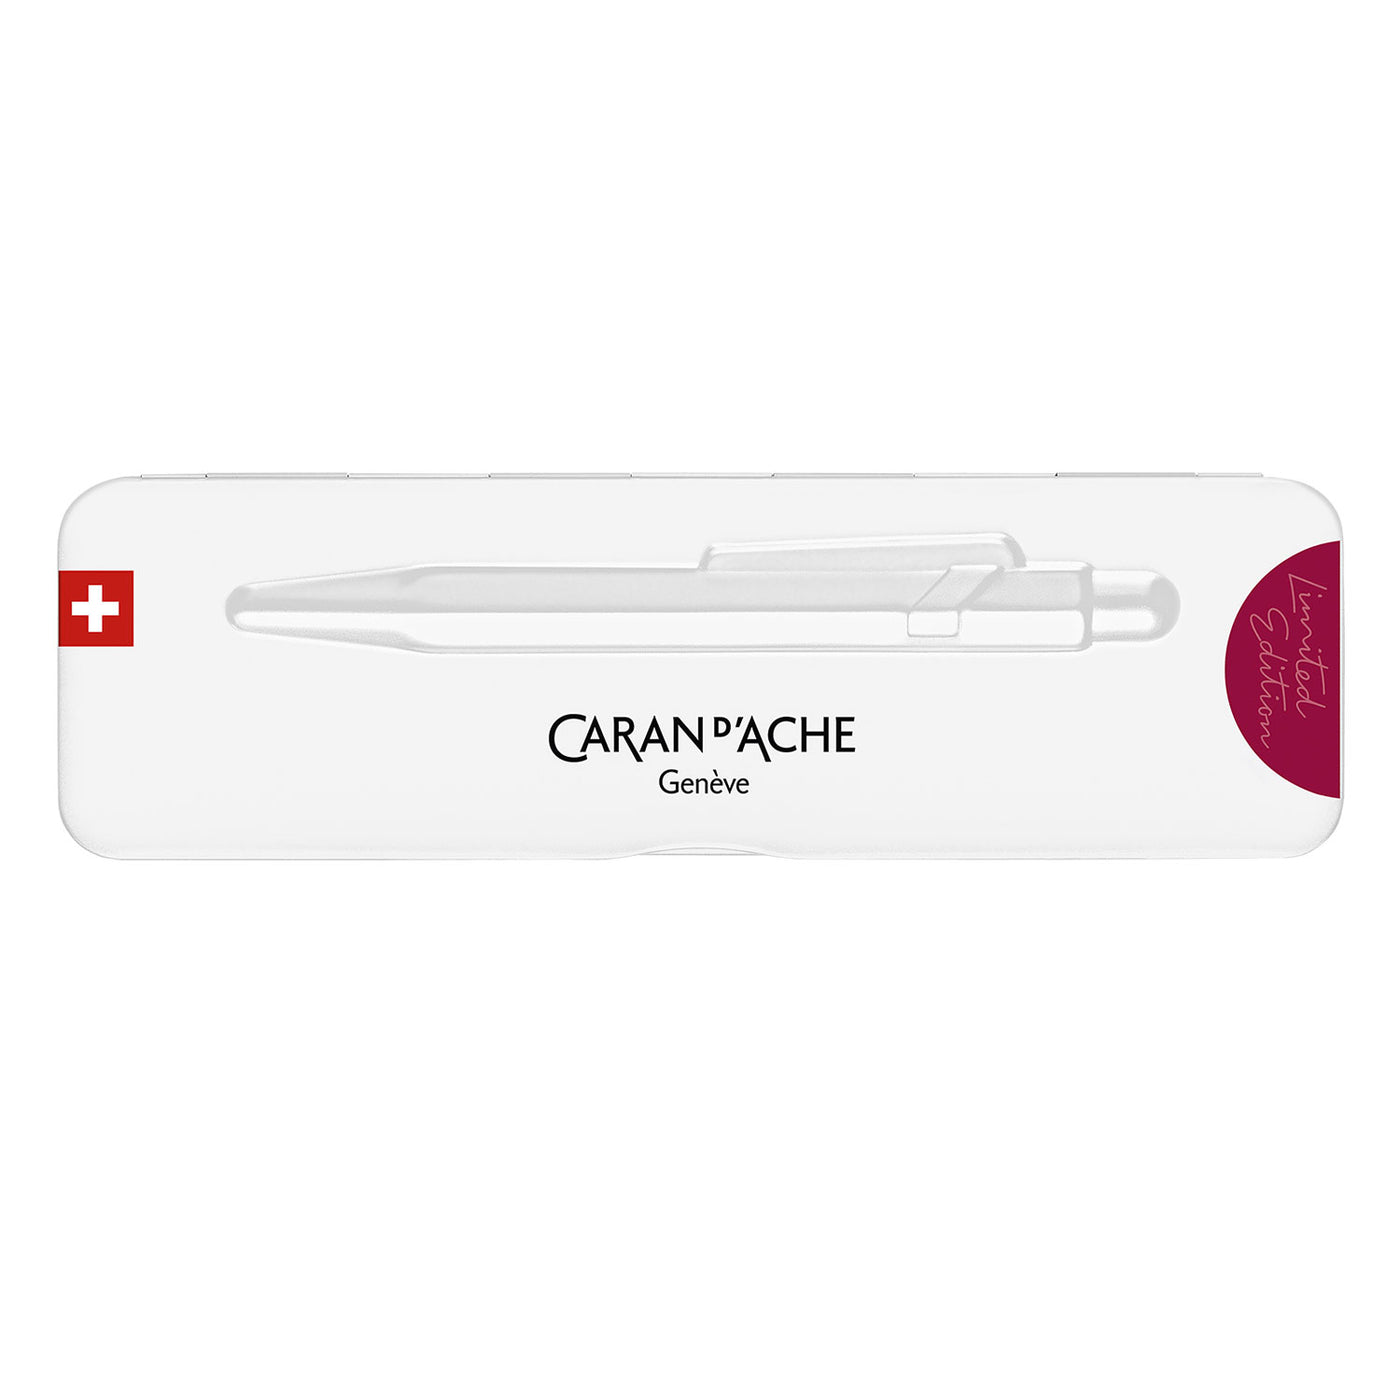 Caran d'Ache 849 Claim Your Style Ball Pen - Garnet Red (Limited Edition) 5